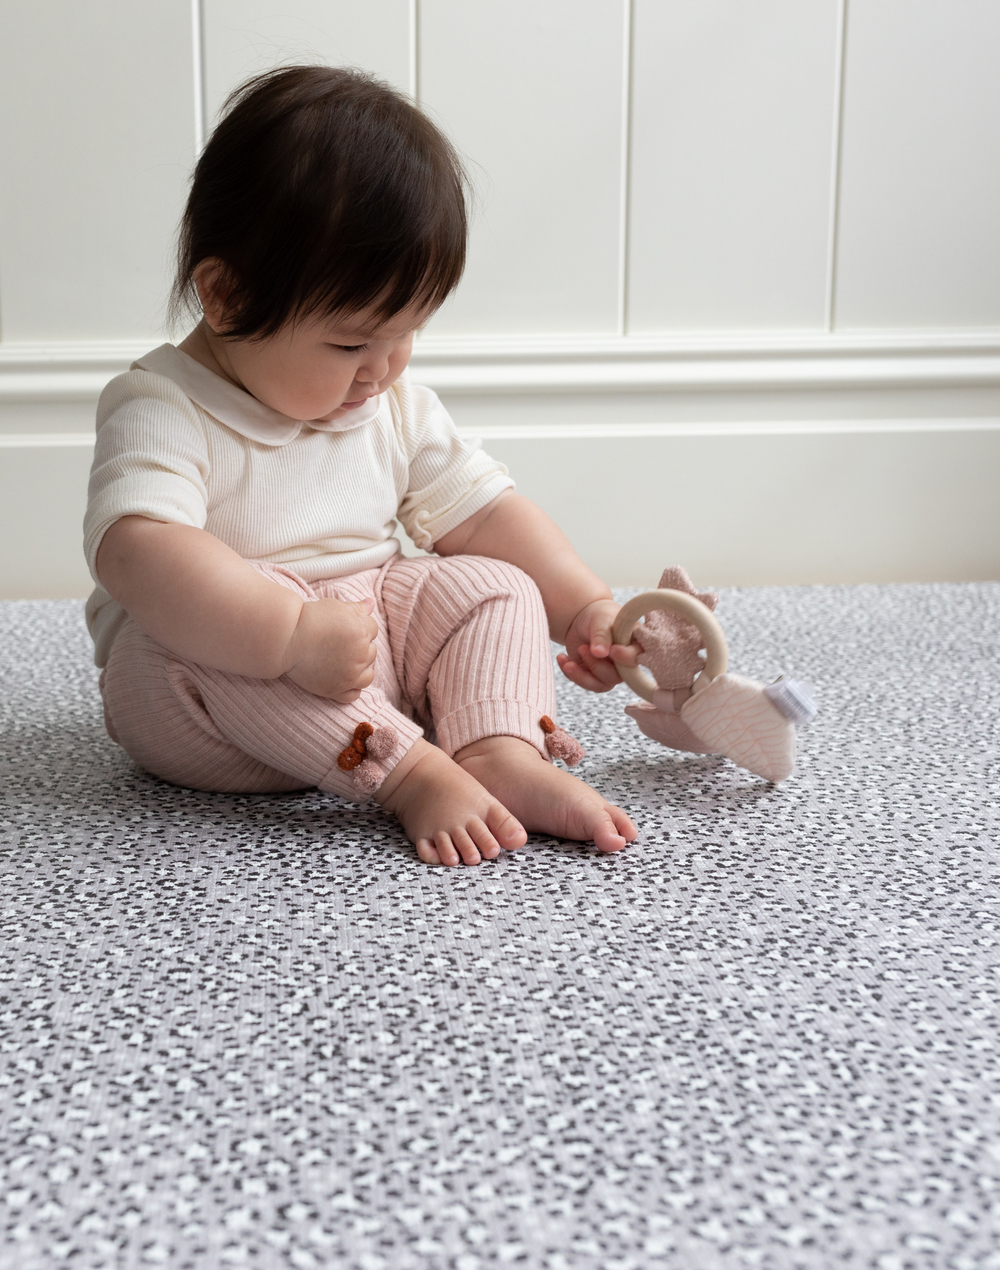 Baby girl playing with baby toy on non toxic kids play mat with grey leopard print pattern